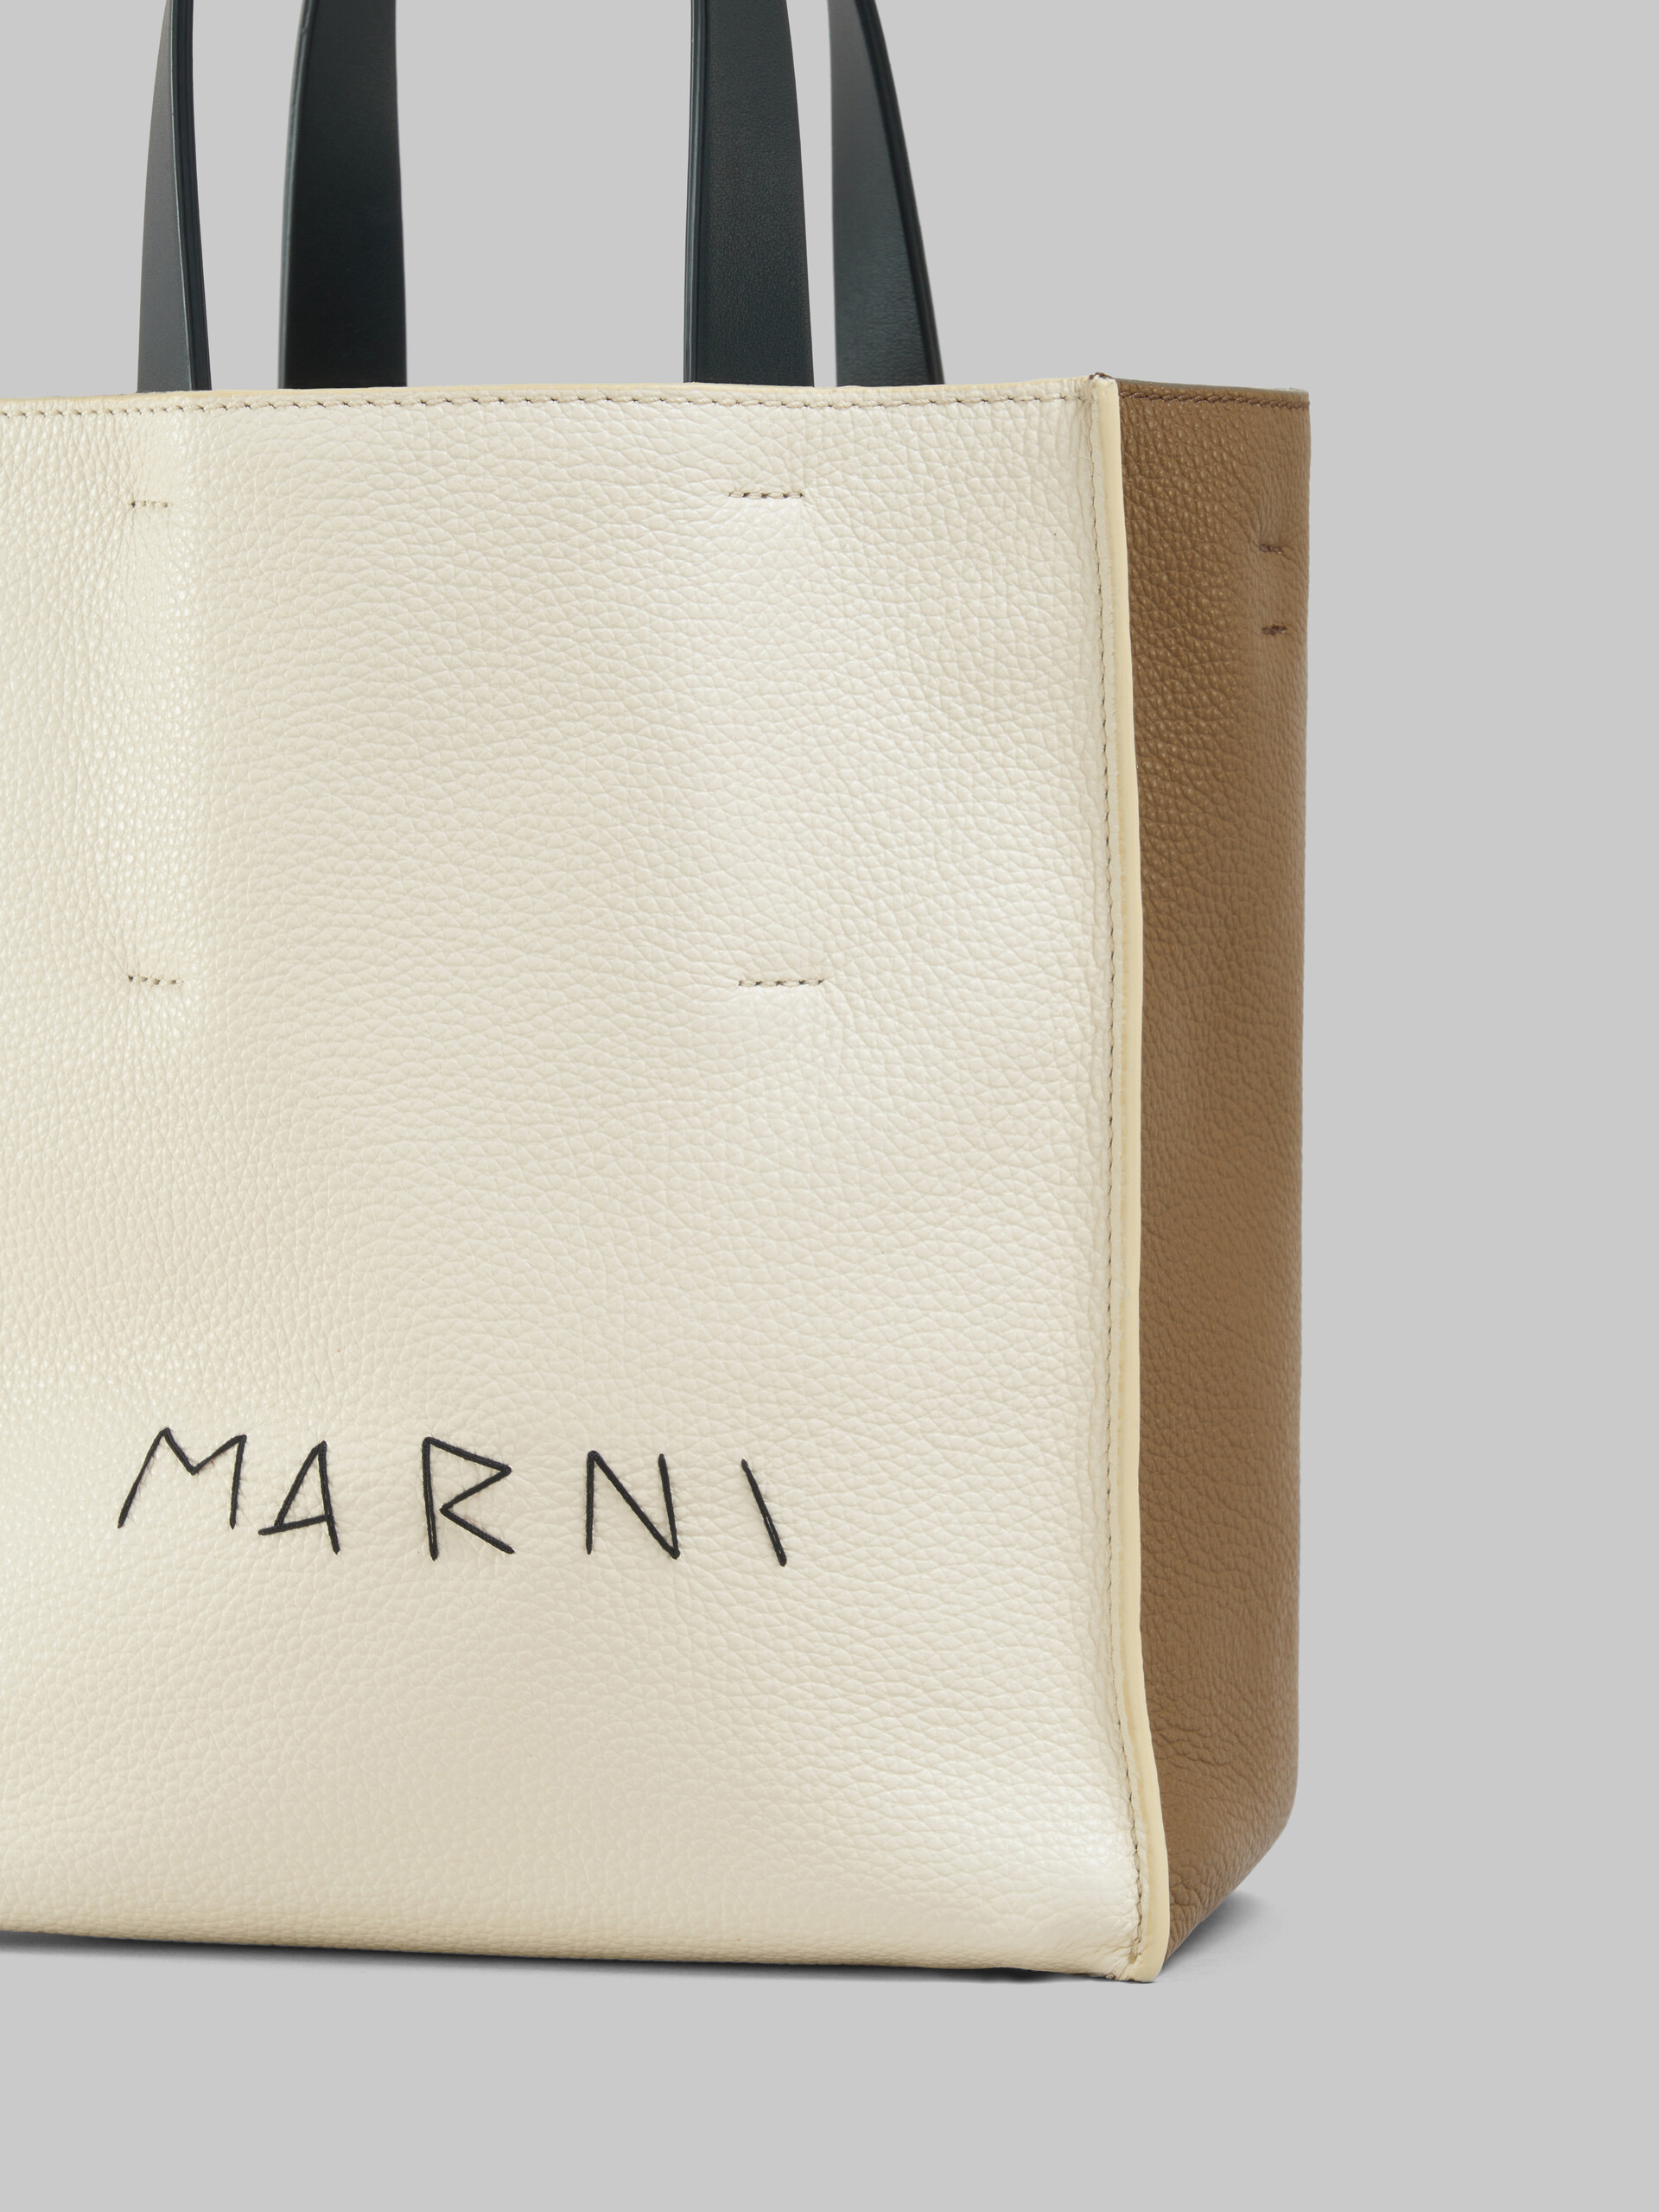 Museo Soft Mini Bag in ivory and brown leather with Marni mending - Shopping Bags - Image 5